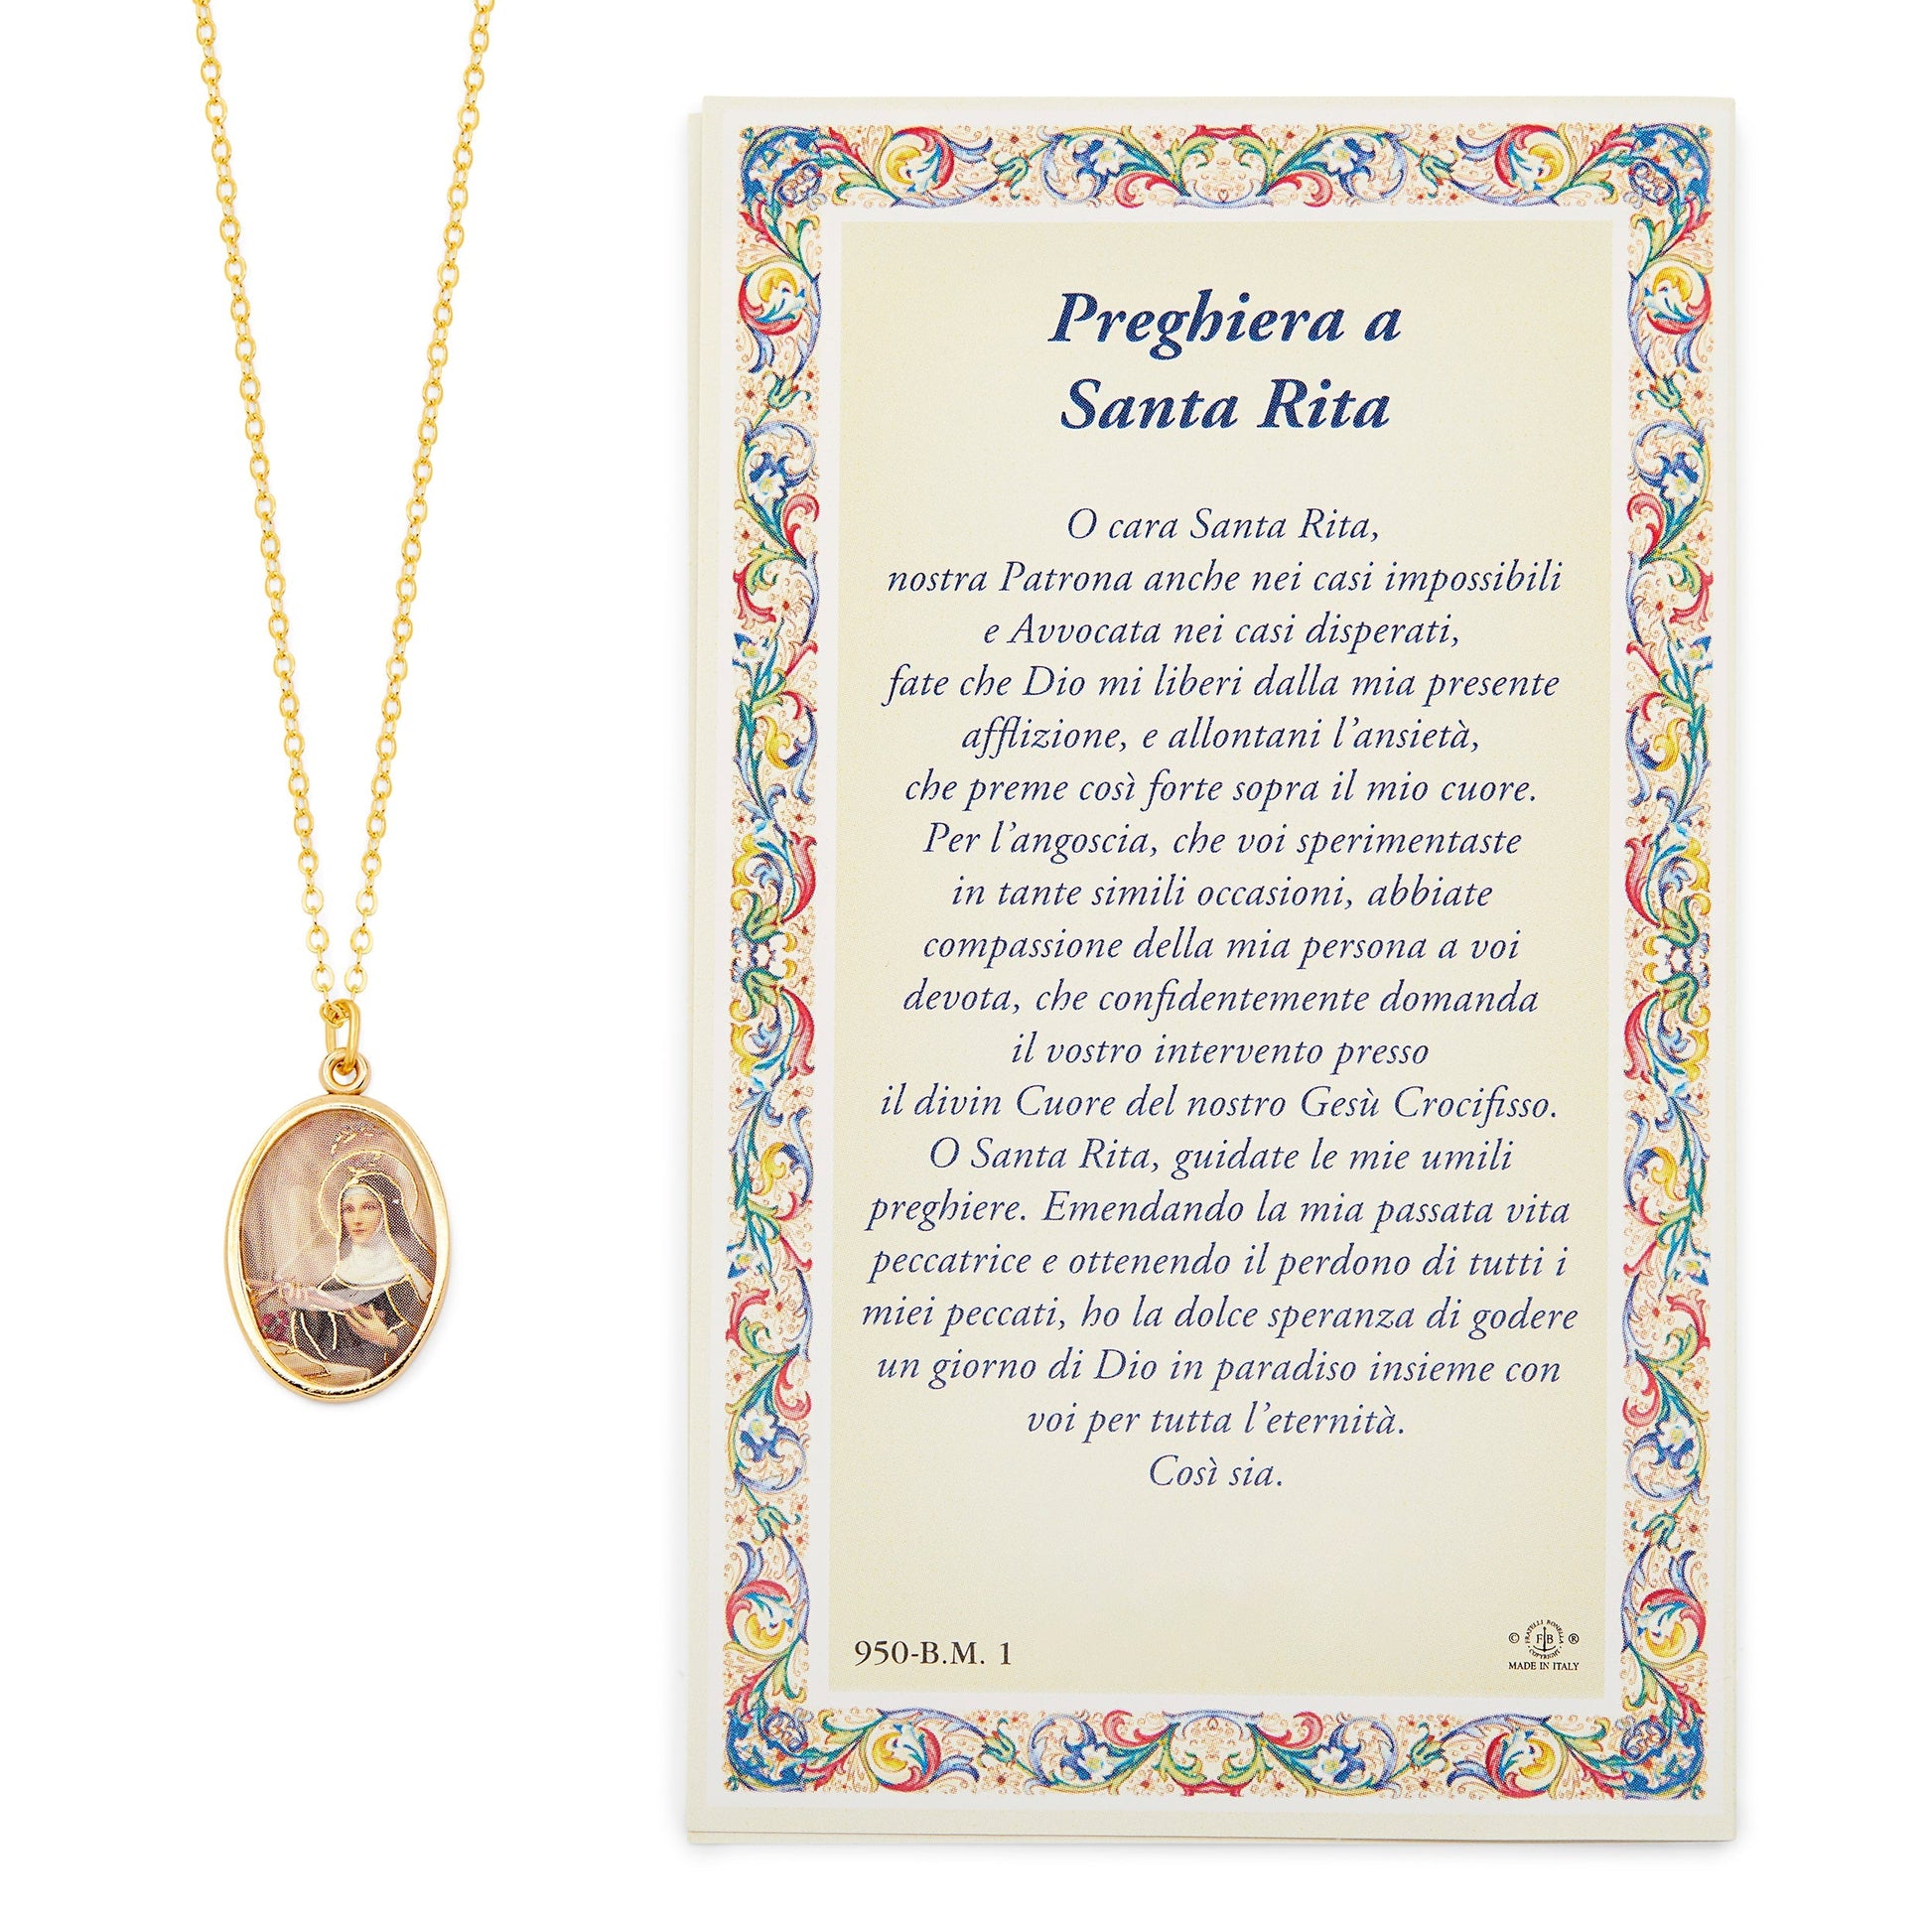 MONDO CATTOLICO Saint Rita Prayer Card and Medal With Chain